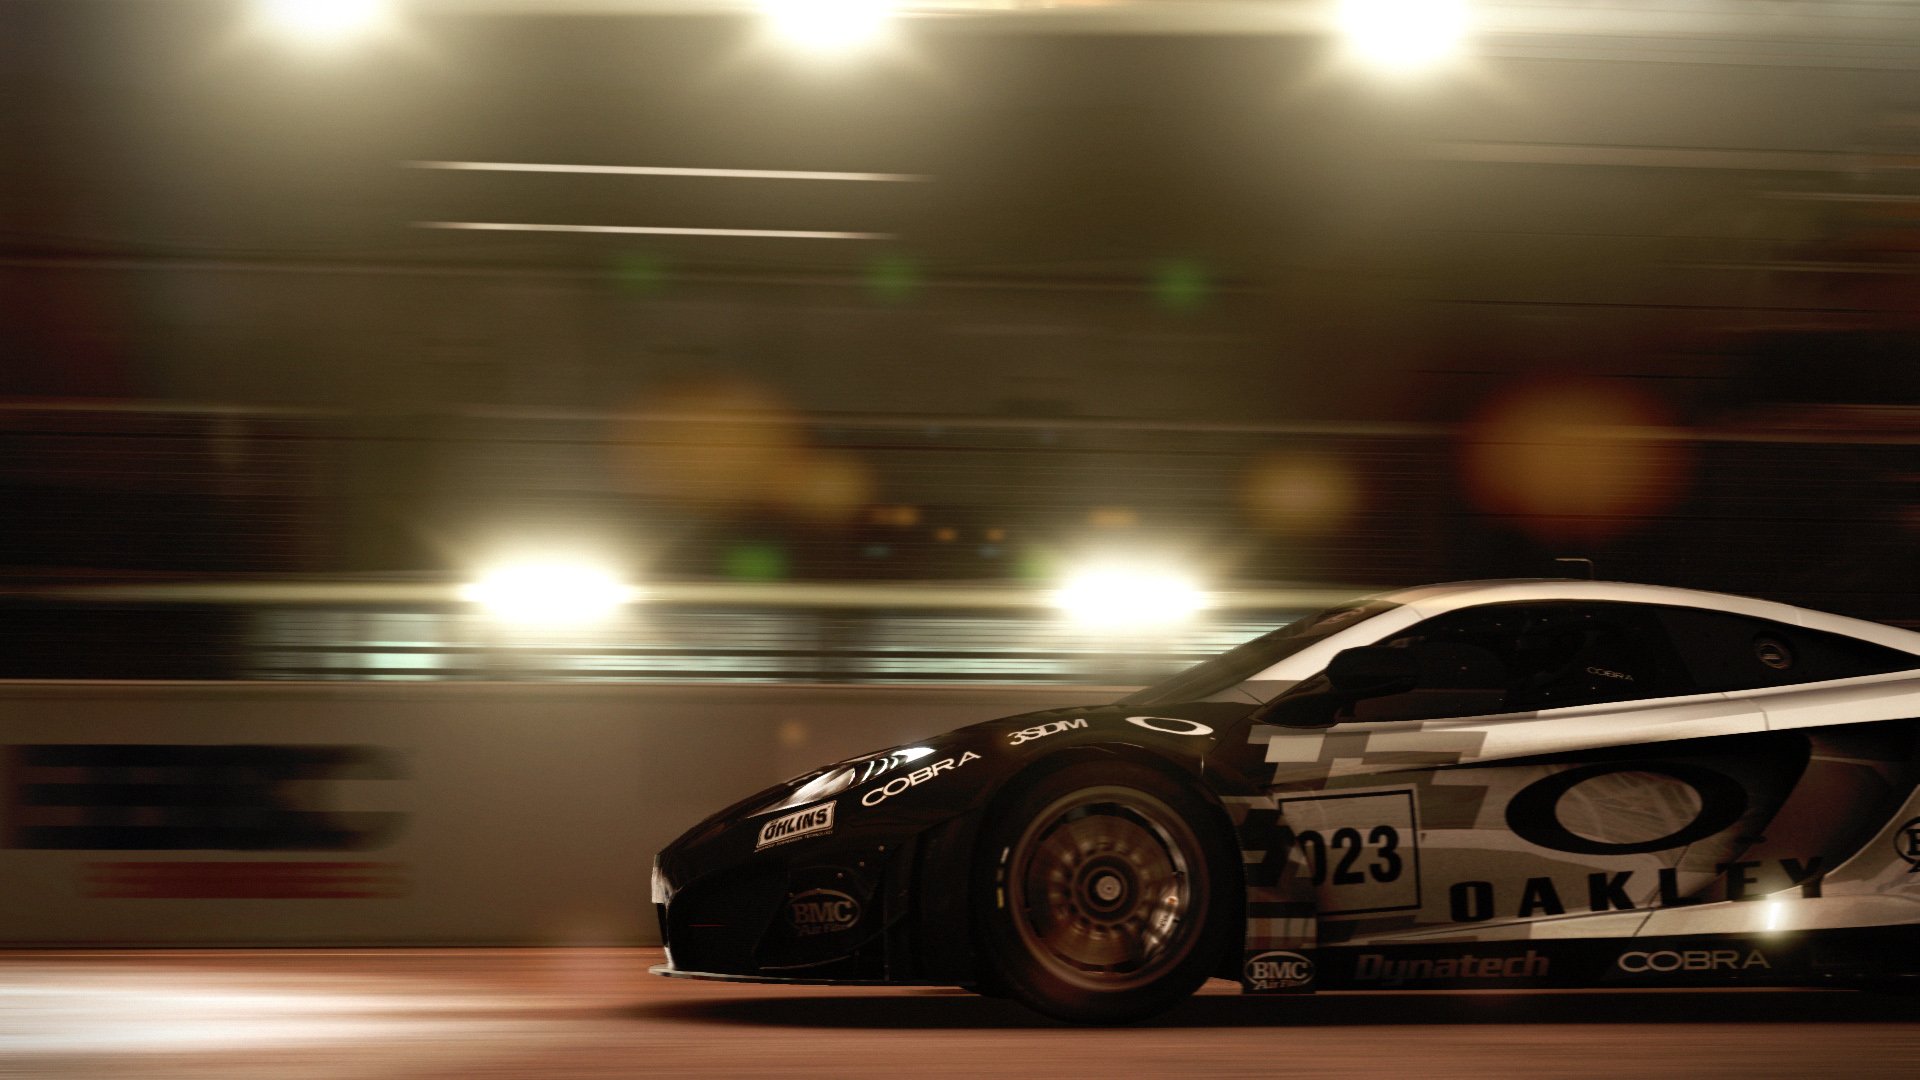 grid, Autosport, Racing, Race, Auto, Game, Action, Open wheel, Tuning, Supercar,  51 Wallpaper